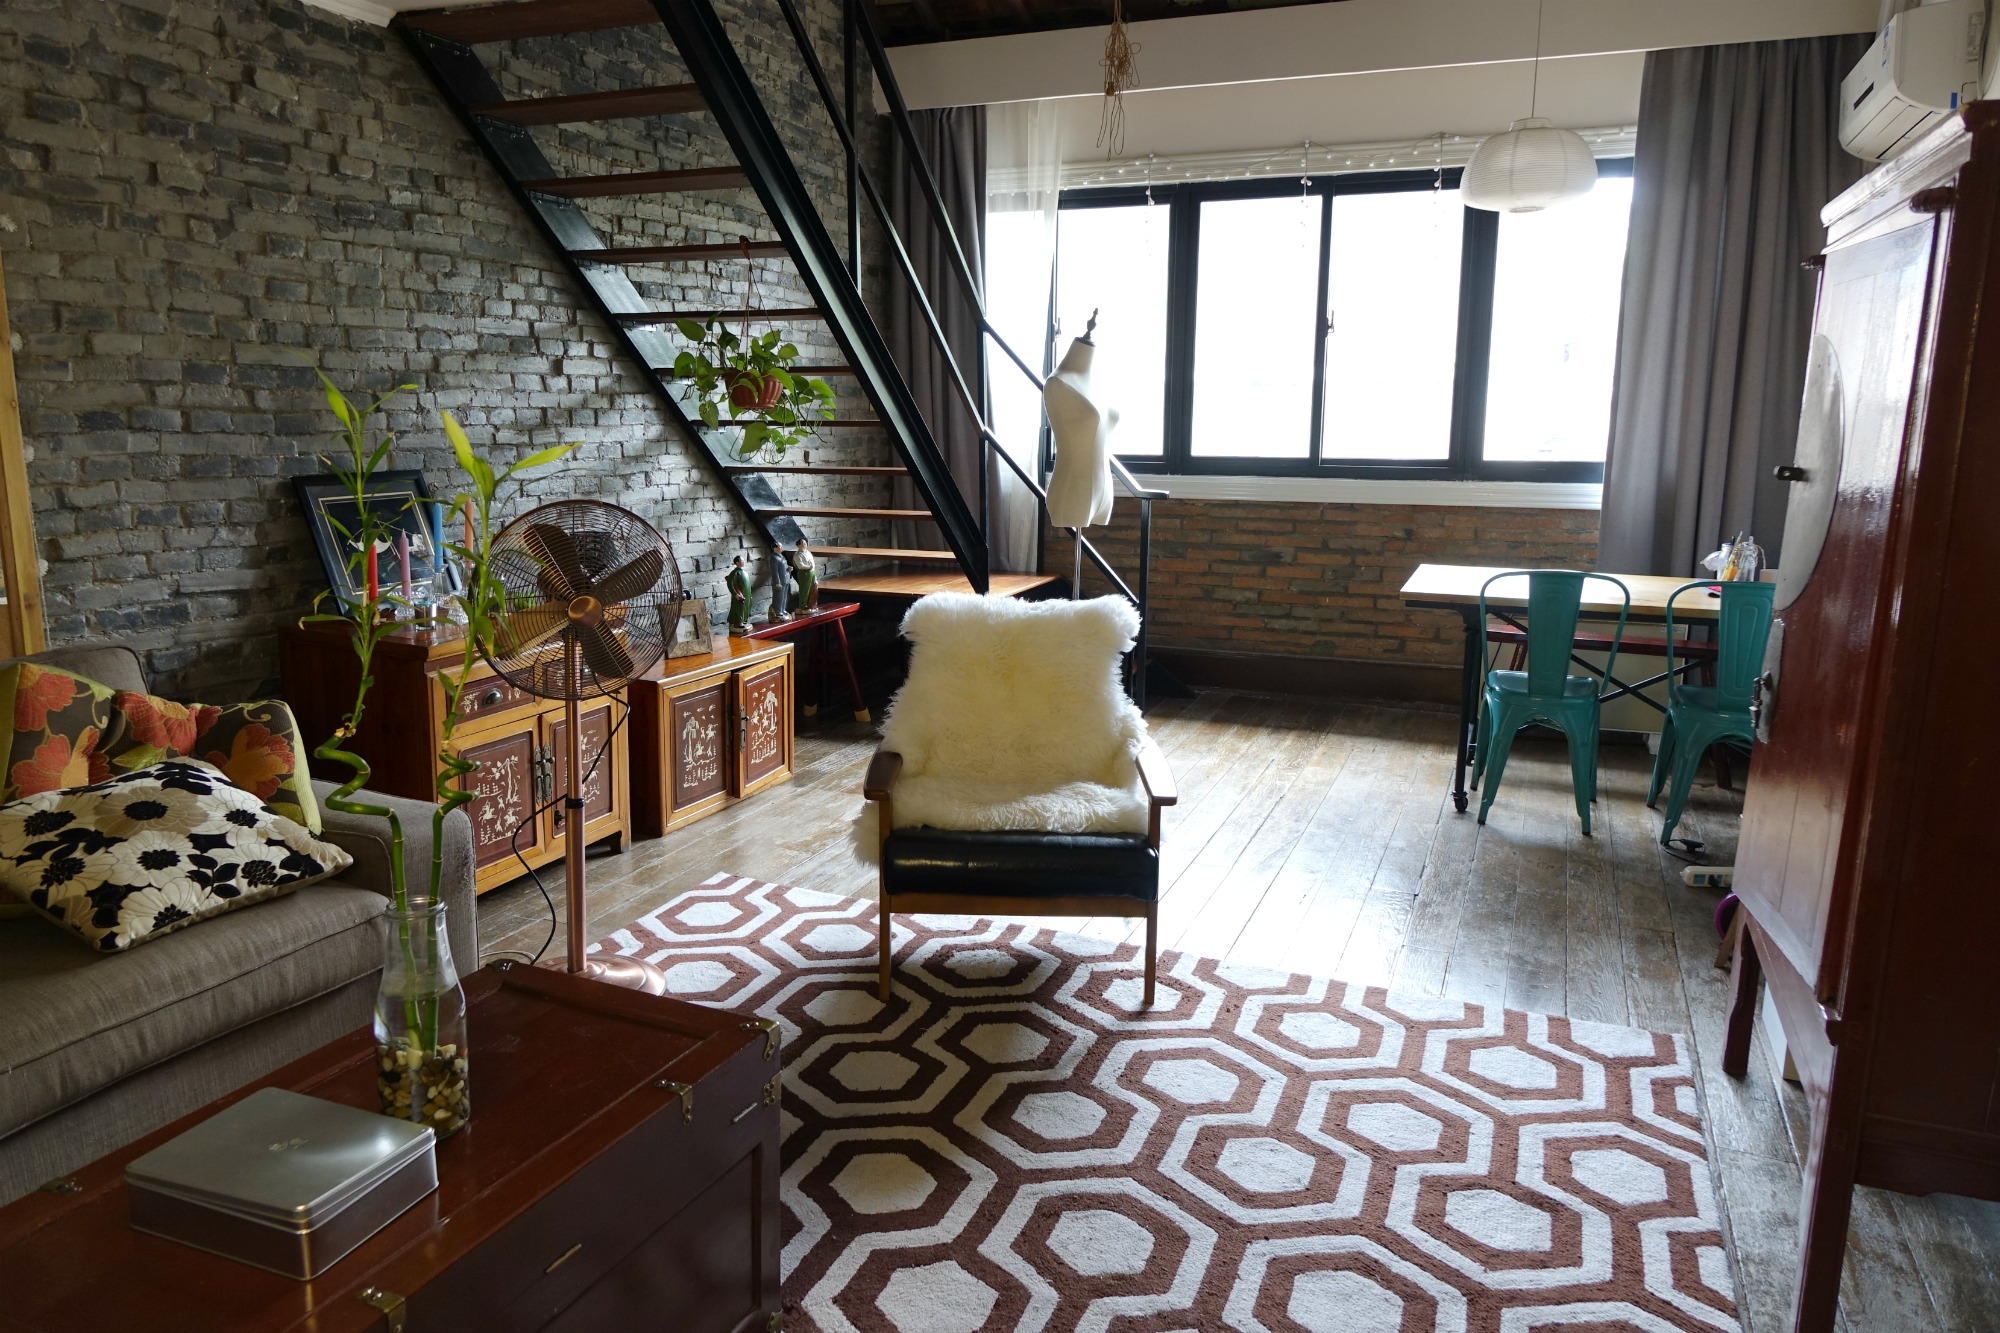 An unforgettable old Shanghai style lane house apartment